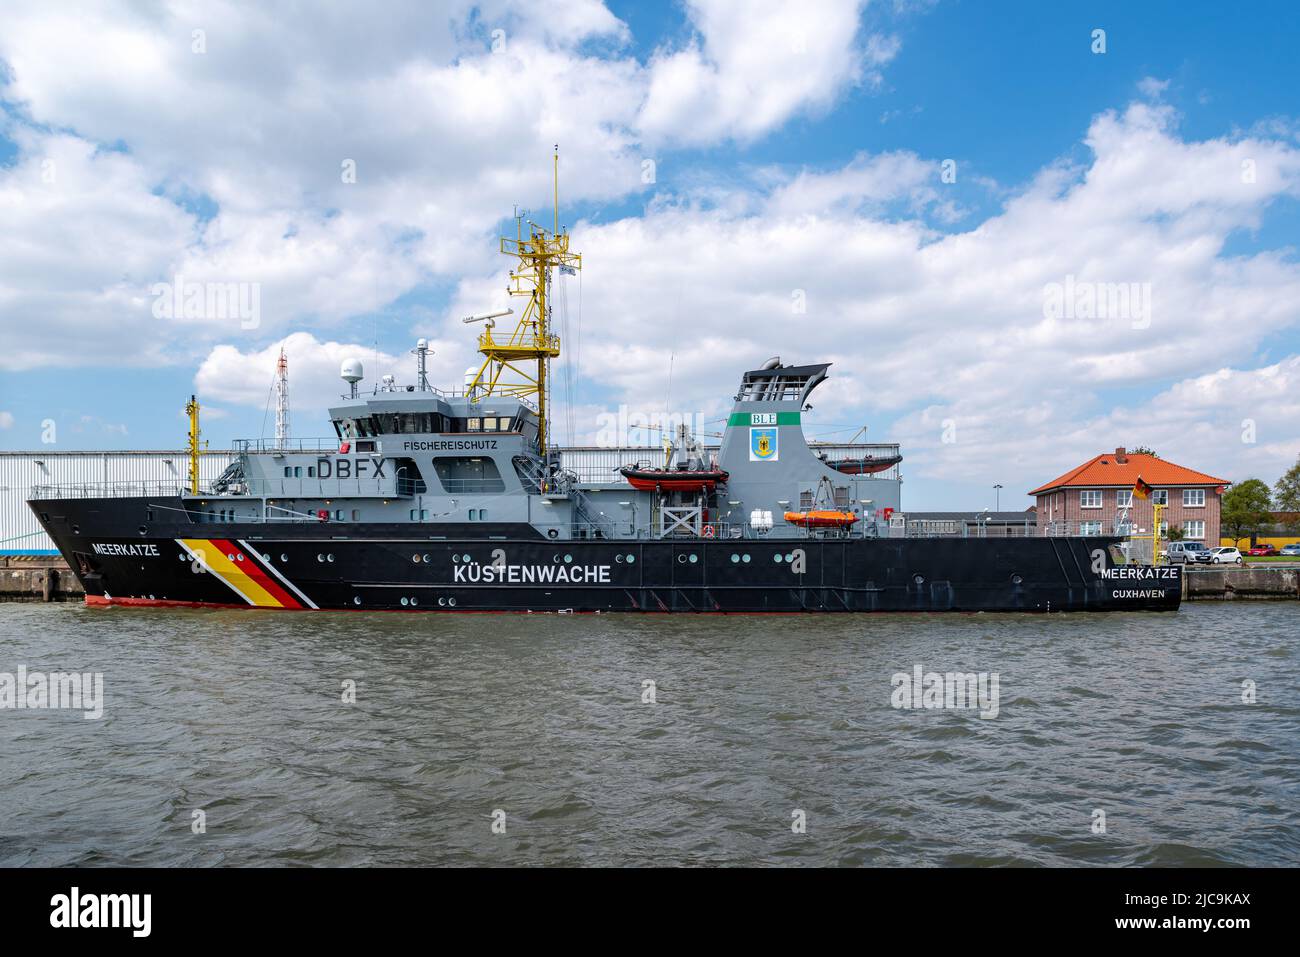 Cuxhaven, Niedersachsen Germany - 05 02 2018: View of the ship Meerkatze, a fisheries protection boat of the German Coast Guard, lying in the port of Stock Photo